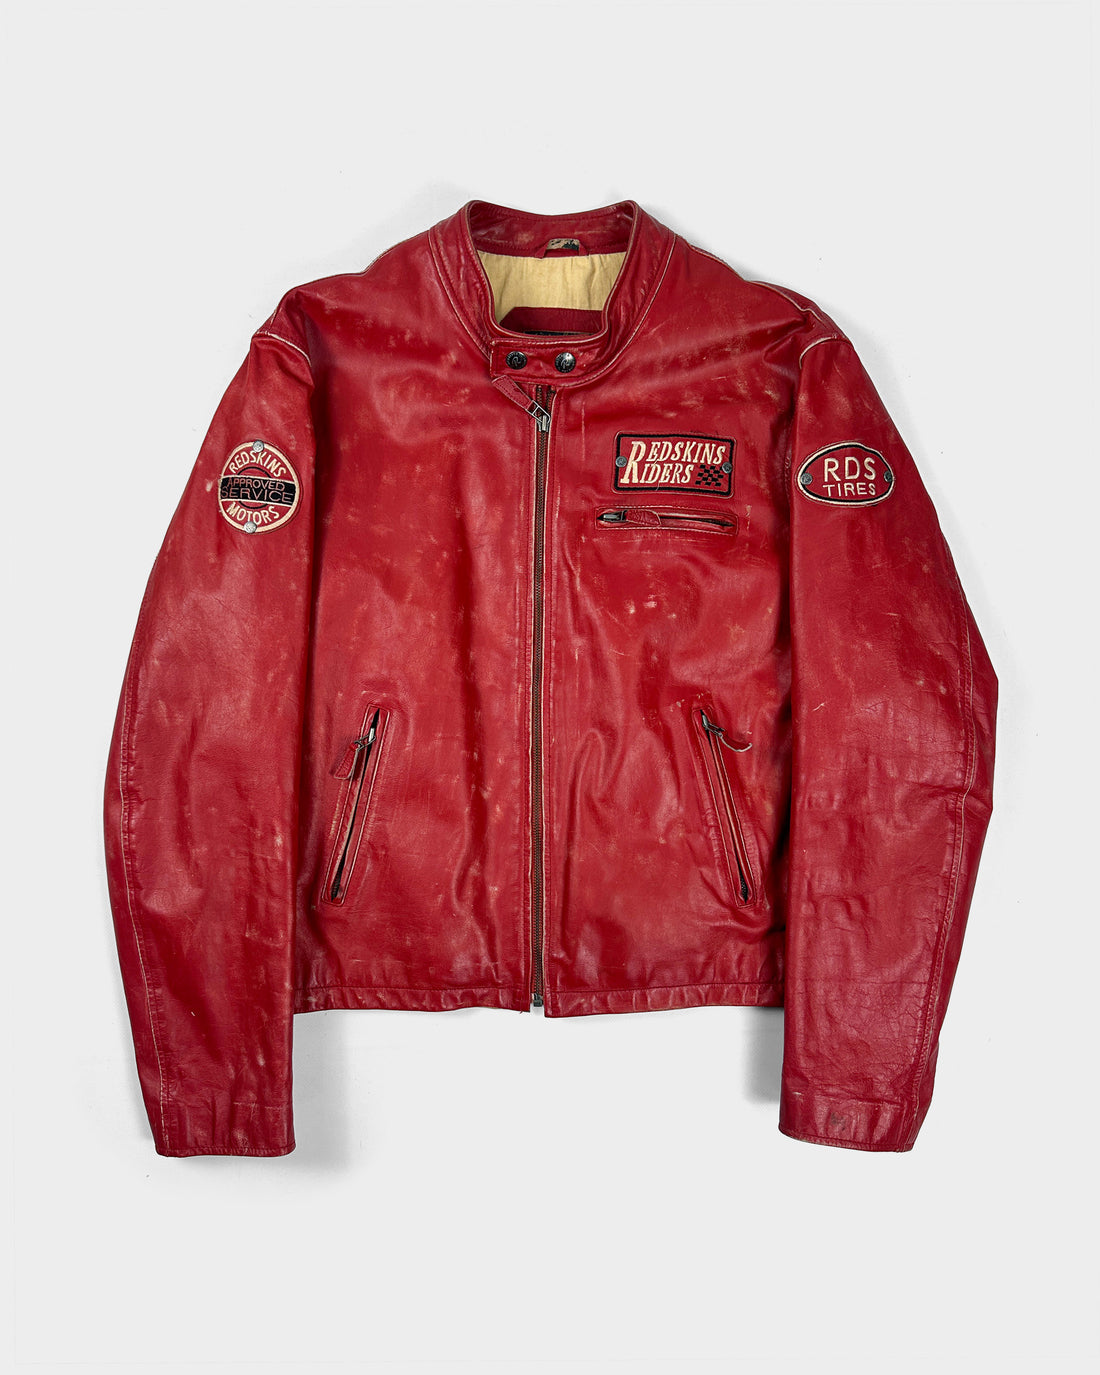 Redskins Red DIstressed Racing Leather Jacket 1990's